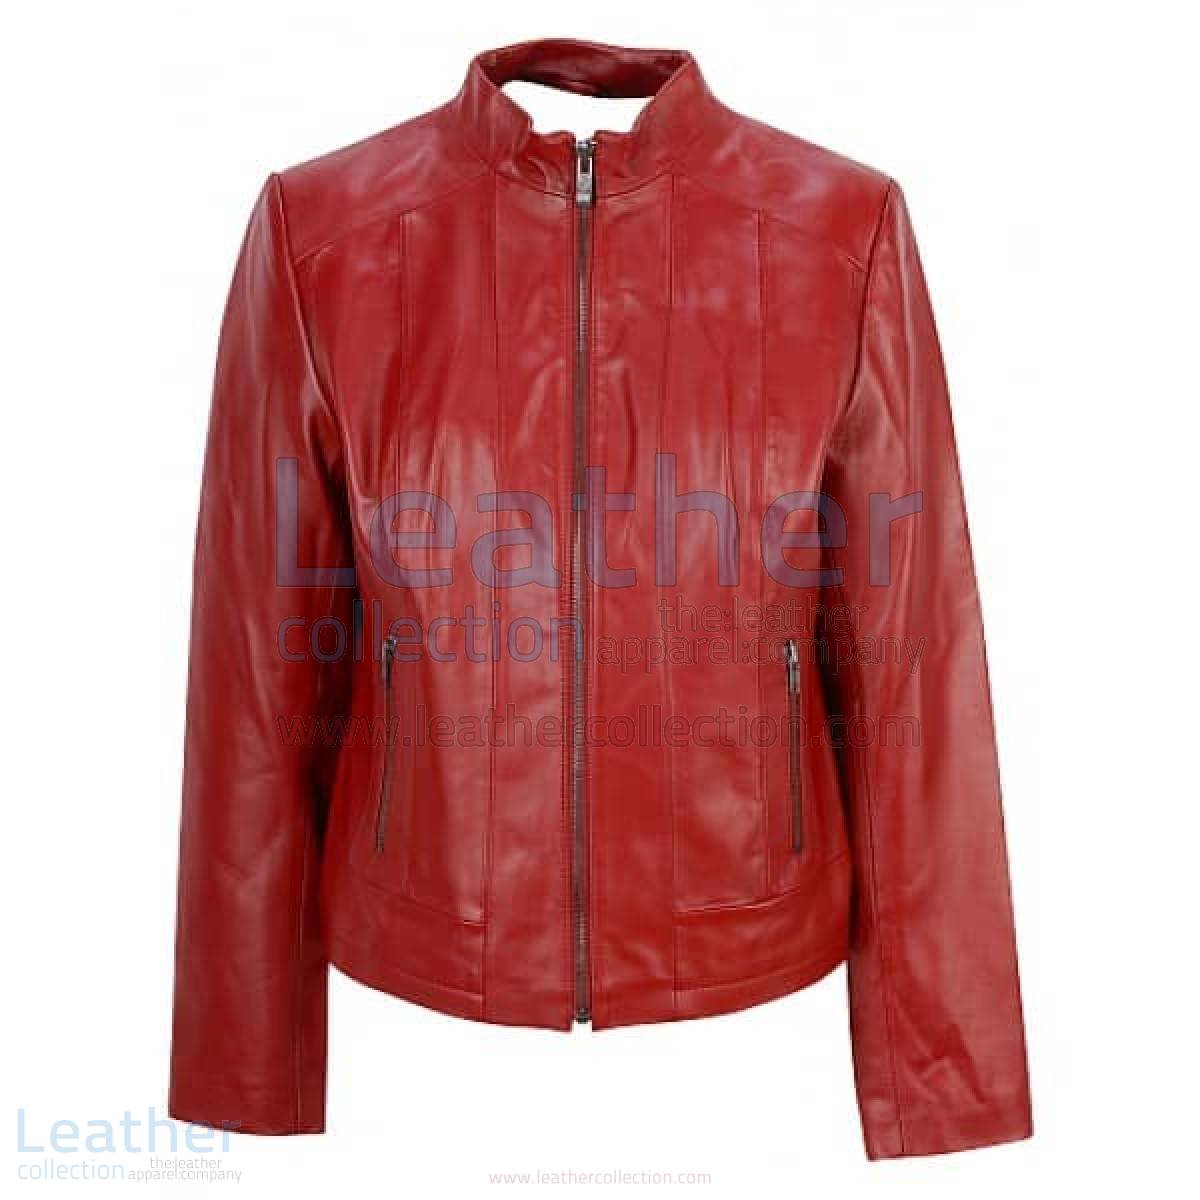 red fashion jacket of leather